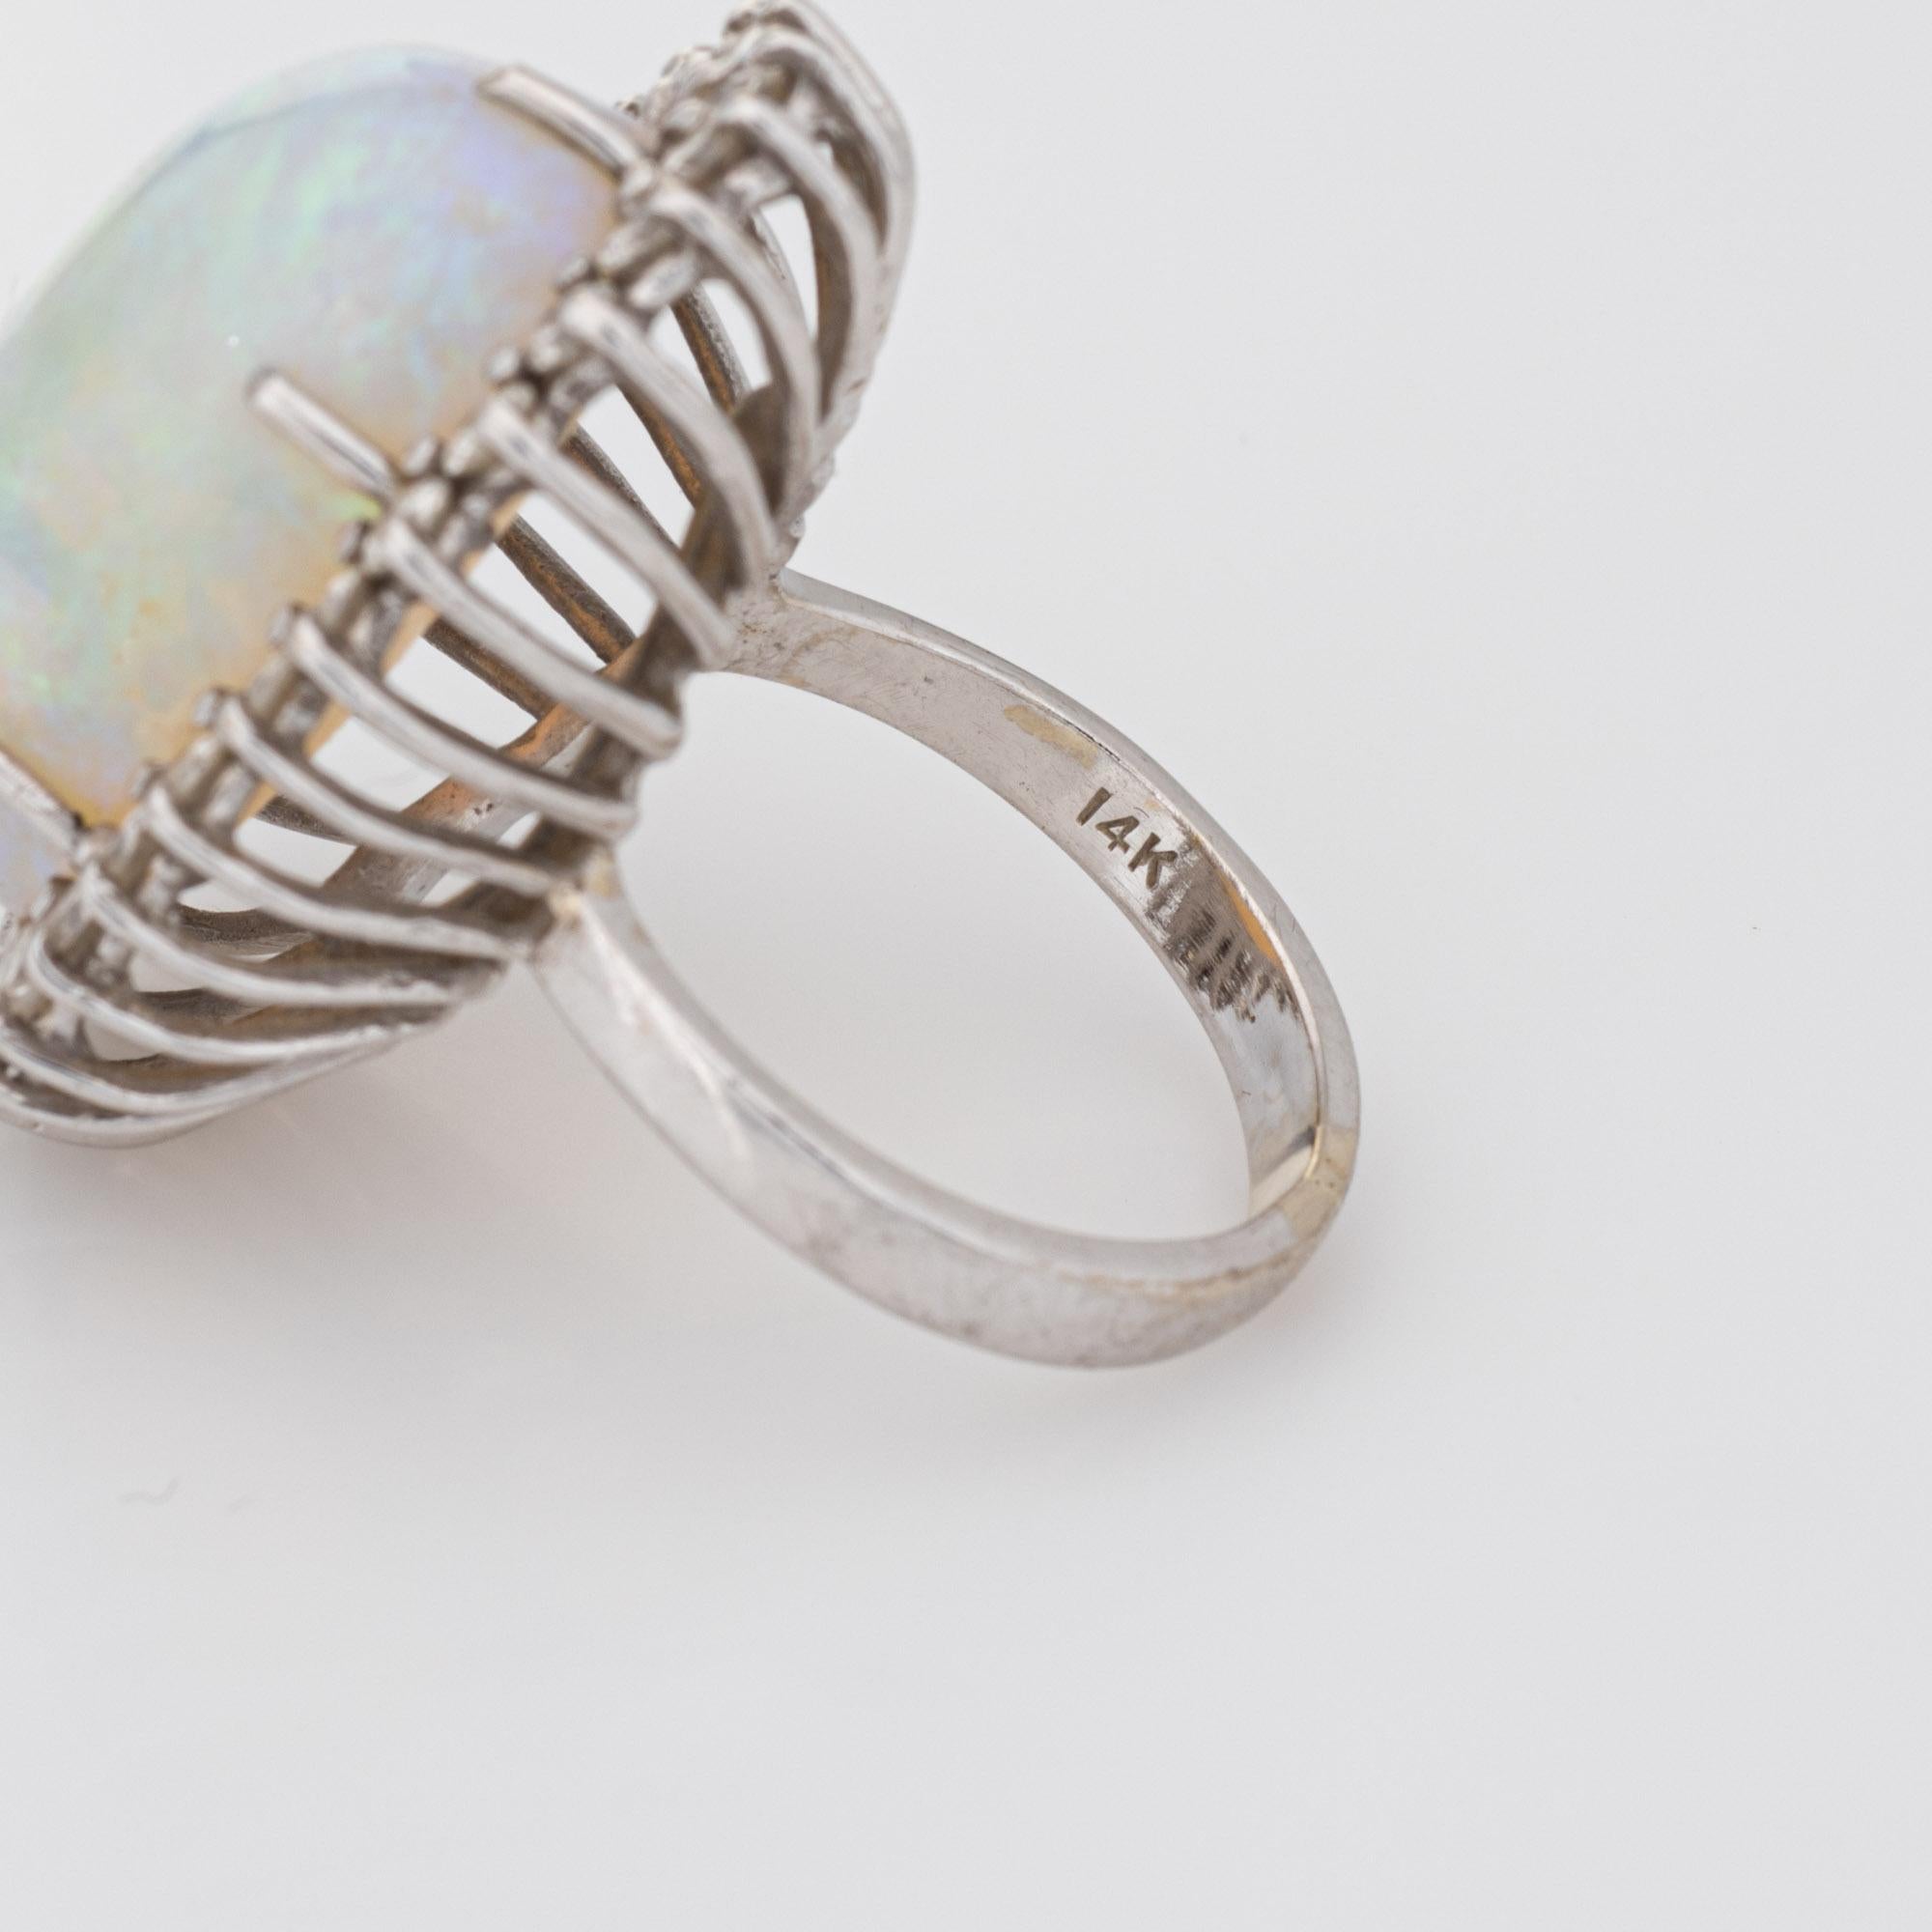 Cabochon Natural 22ct Opal Ring Vintage 14k White Gold Large Oval Cocktail Jewelry For Sale